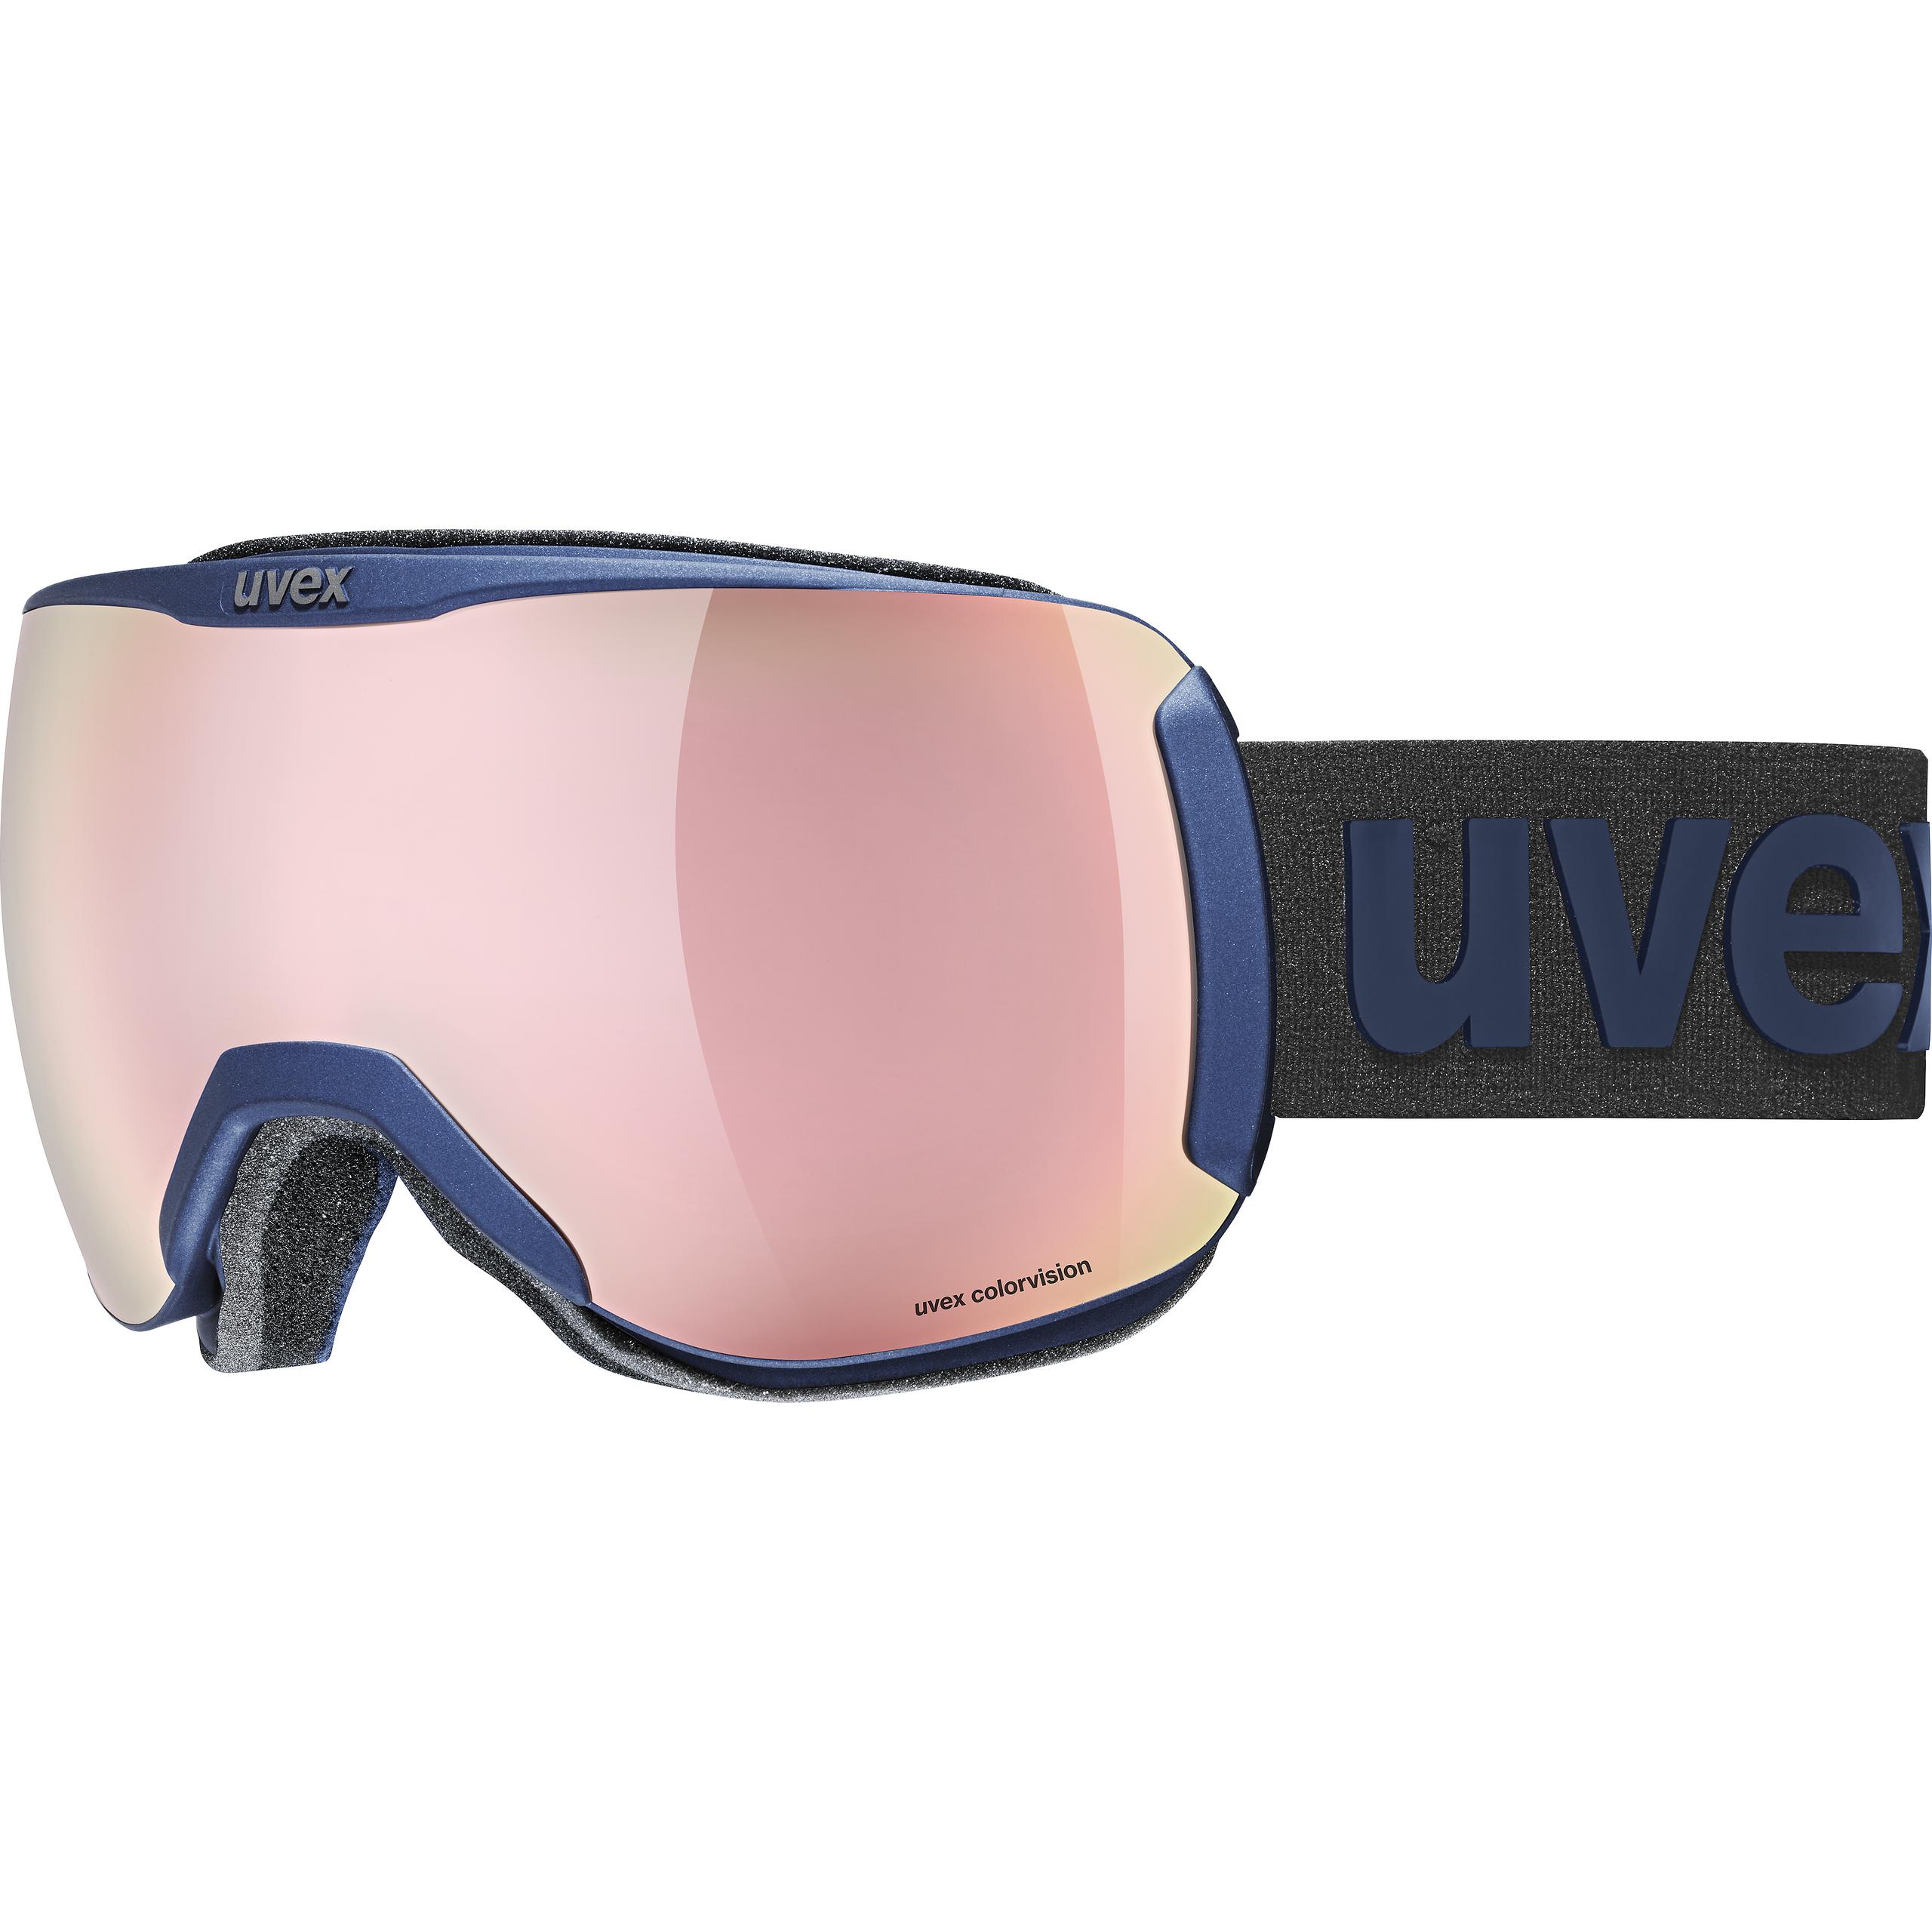 Details about   UVEX Sports VICTORY Clear Eyewear Ski Snowboarding Goggles 